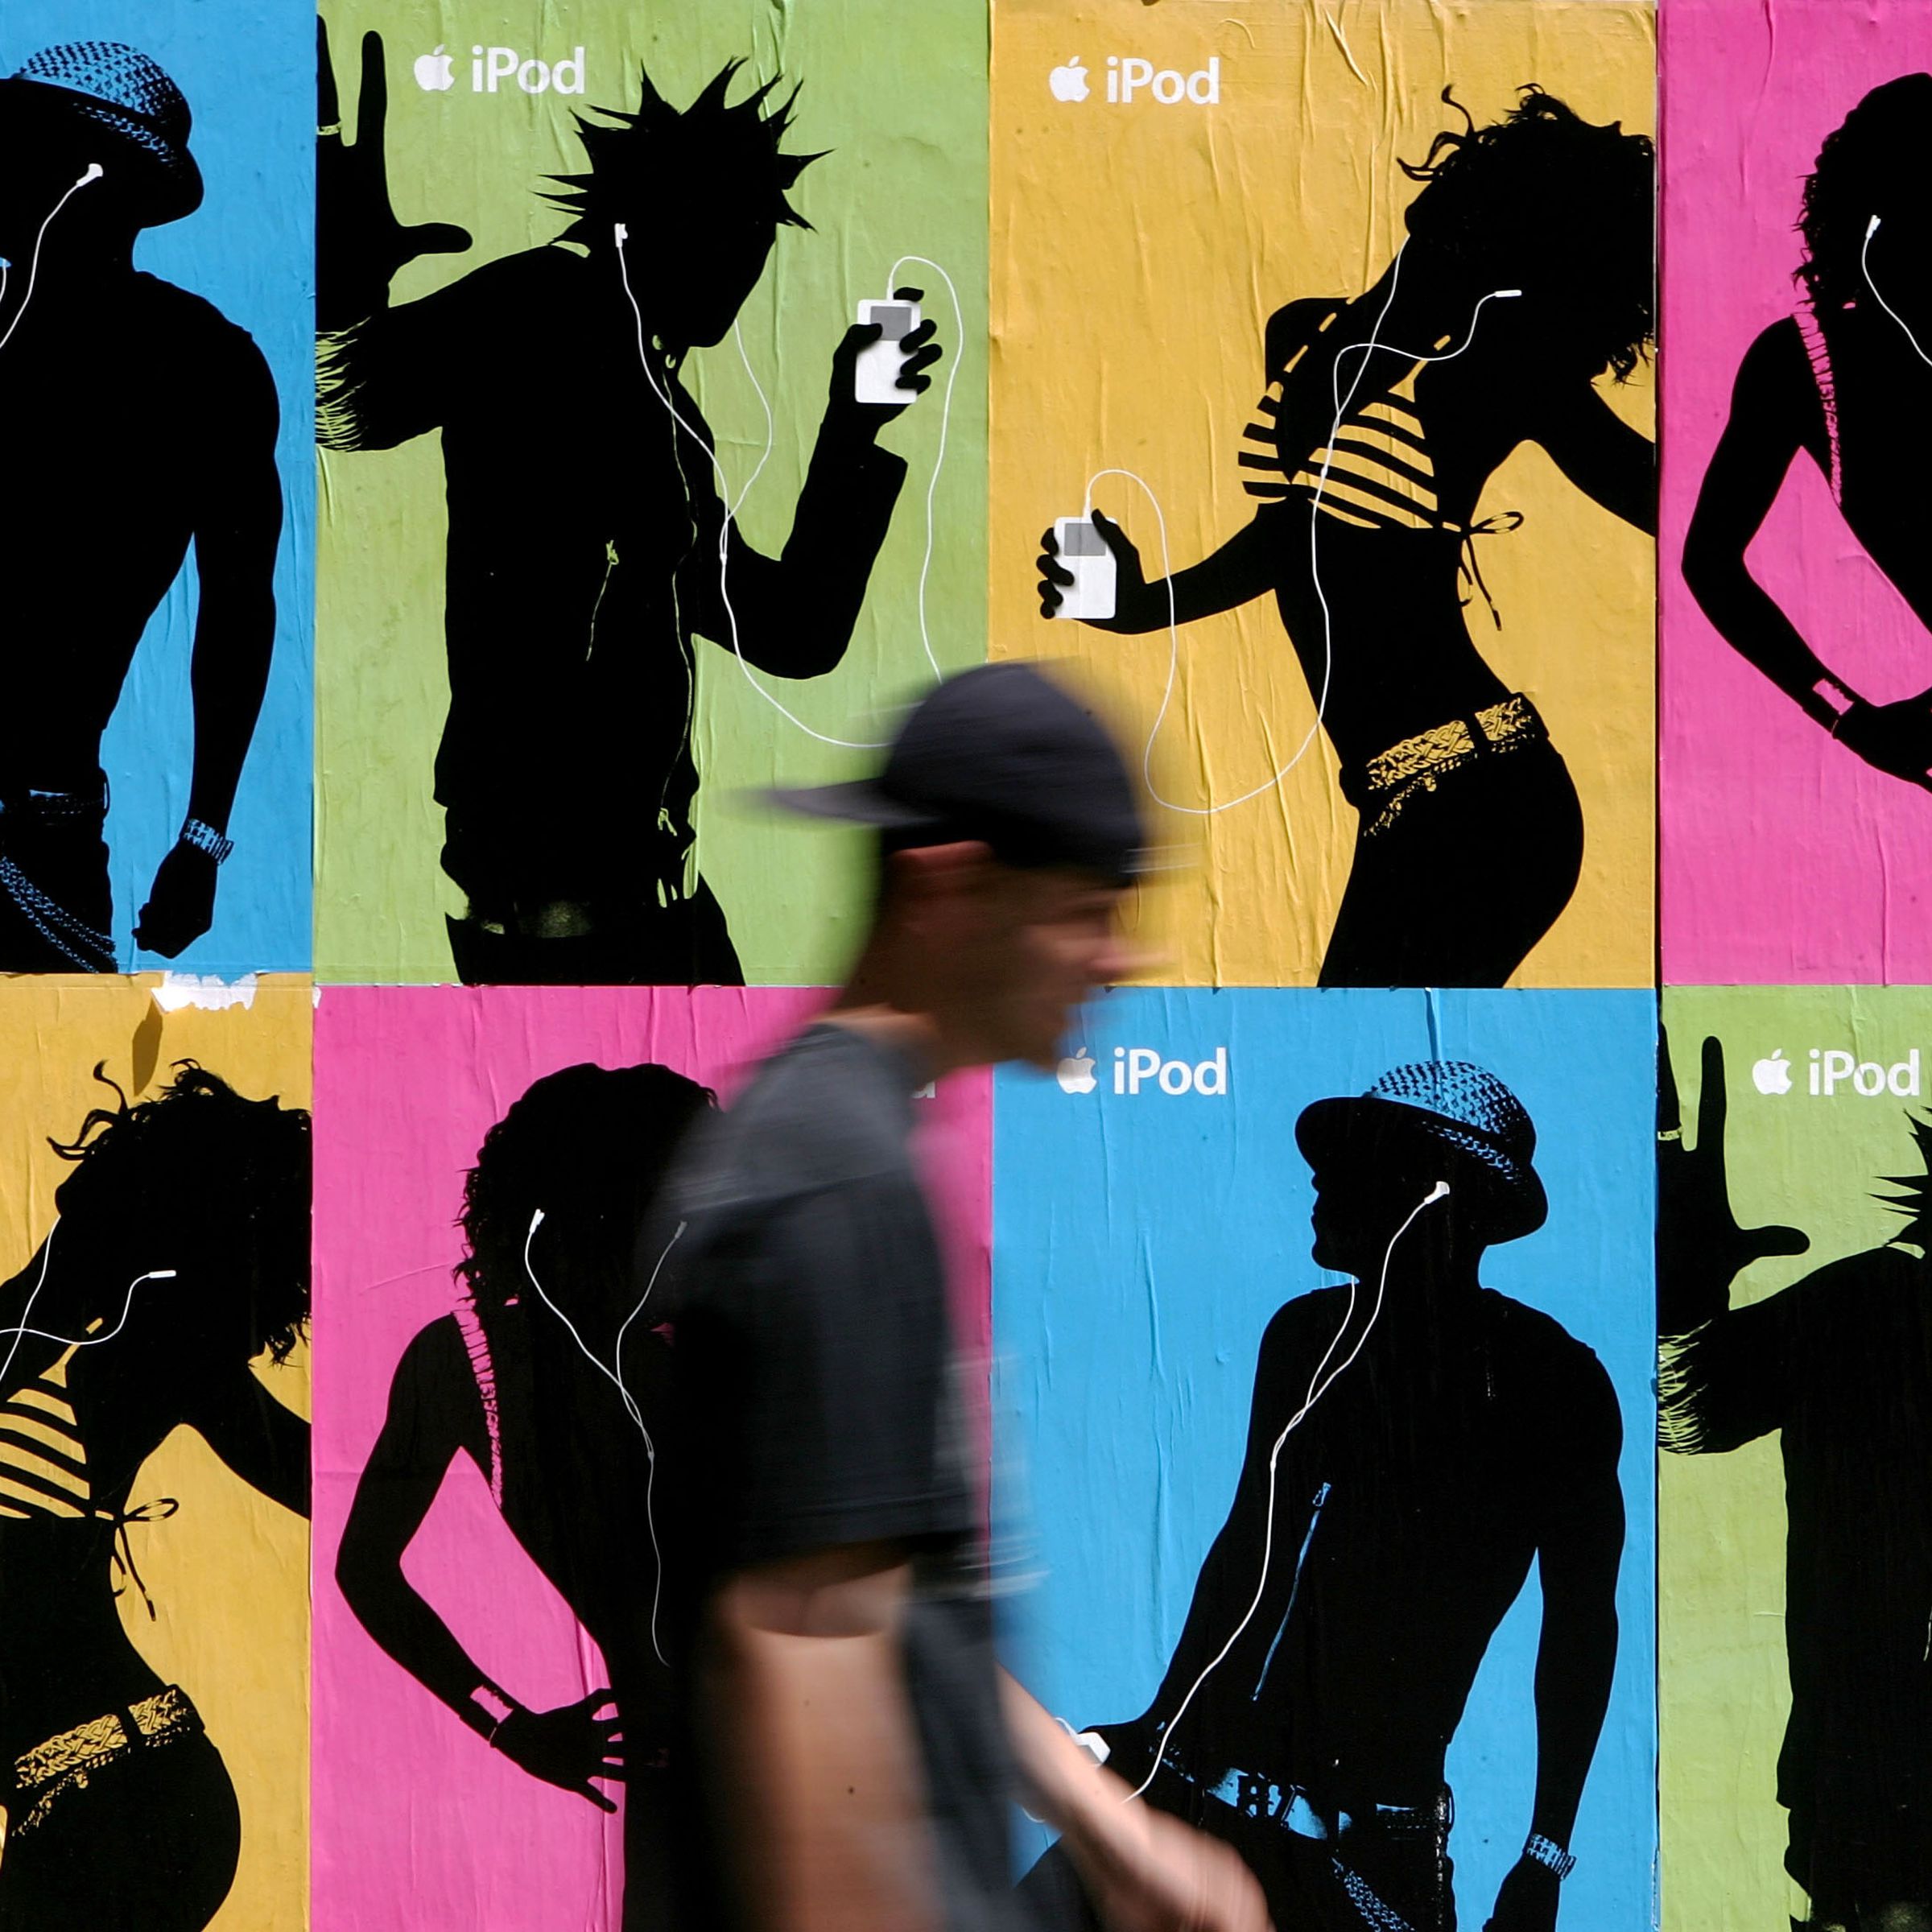 A pedestrian passes a wall covered with iPod advertisements in 2005